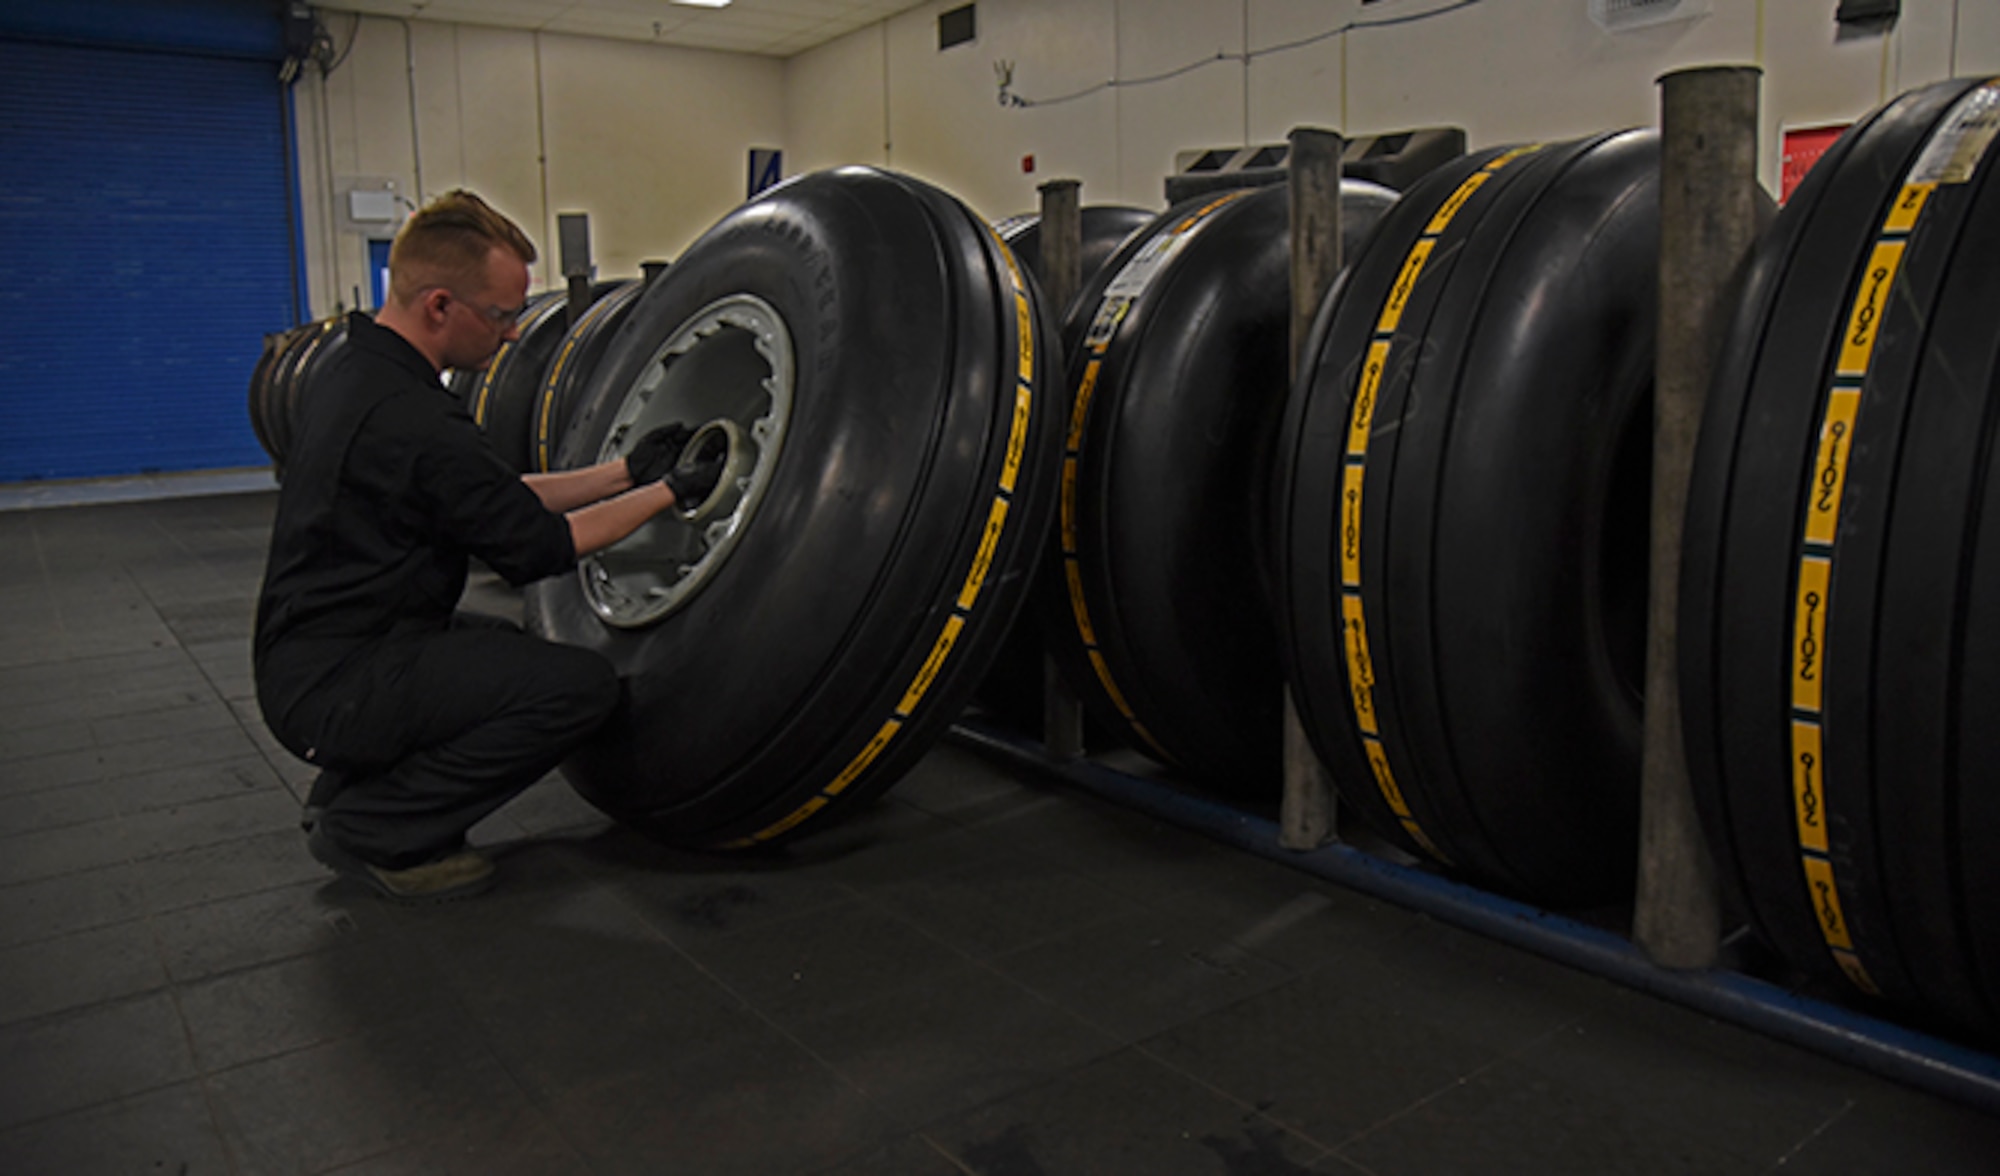 Airman 1st Class Cody Mathews, 92nd Maintenance Squadron aerospace repair journeyman, completes a tire build at Fairchild Air Force Base July 22, 2016. The aerospace repair shop specializes in tasks such as aircraft flight controls, landing gear components, wheel and tire repair and Crash, Damaged/Disabled Aircraft Recovery. (U.S. Air Force photo/Airman 1st Class Mackenzie Richardson)